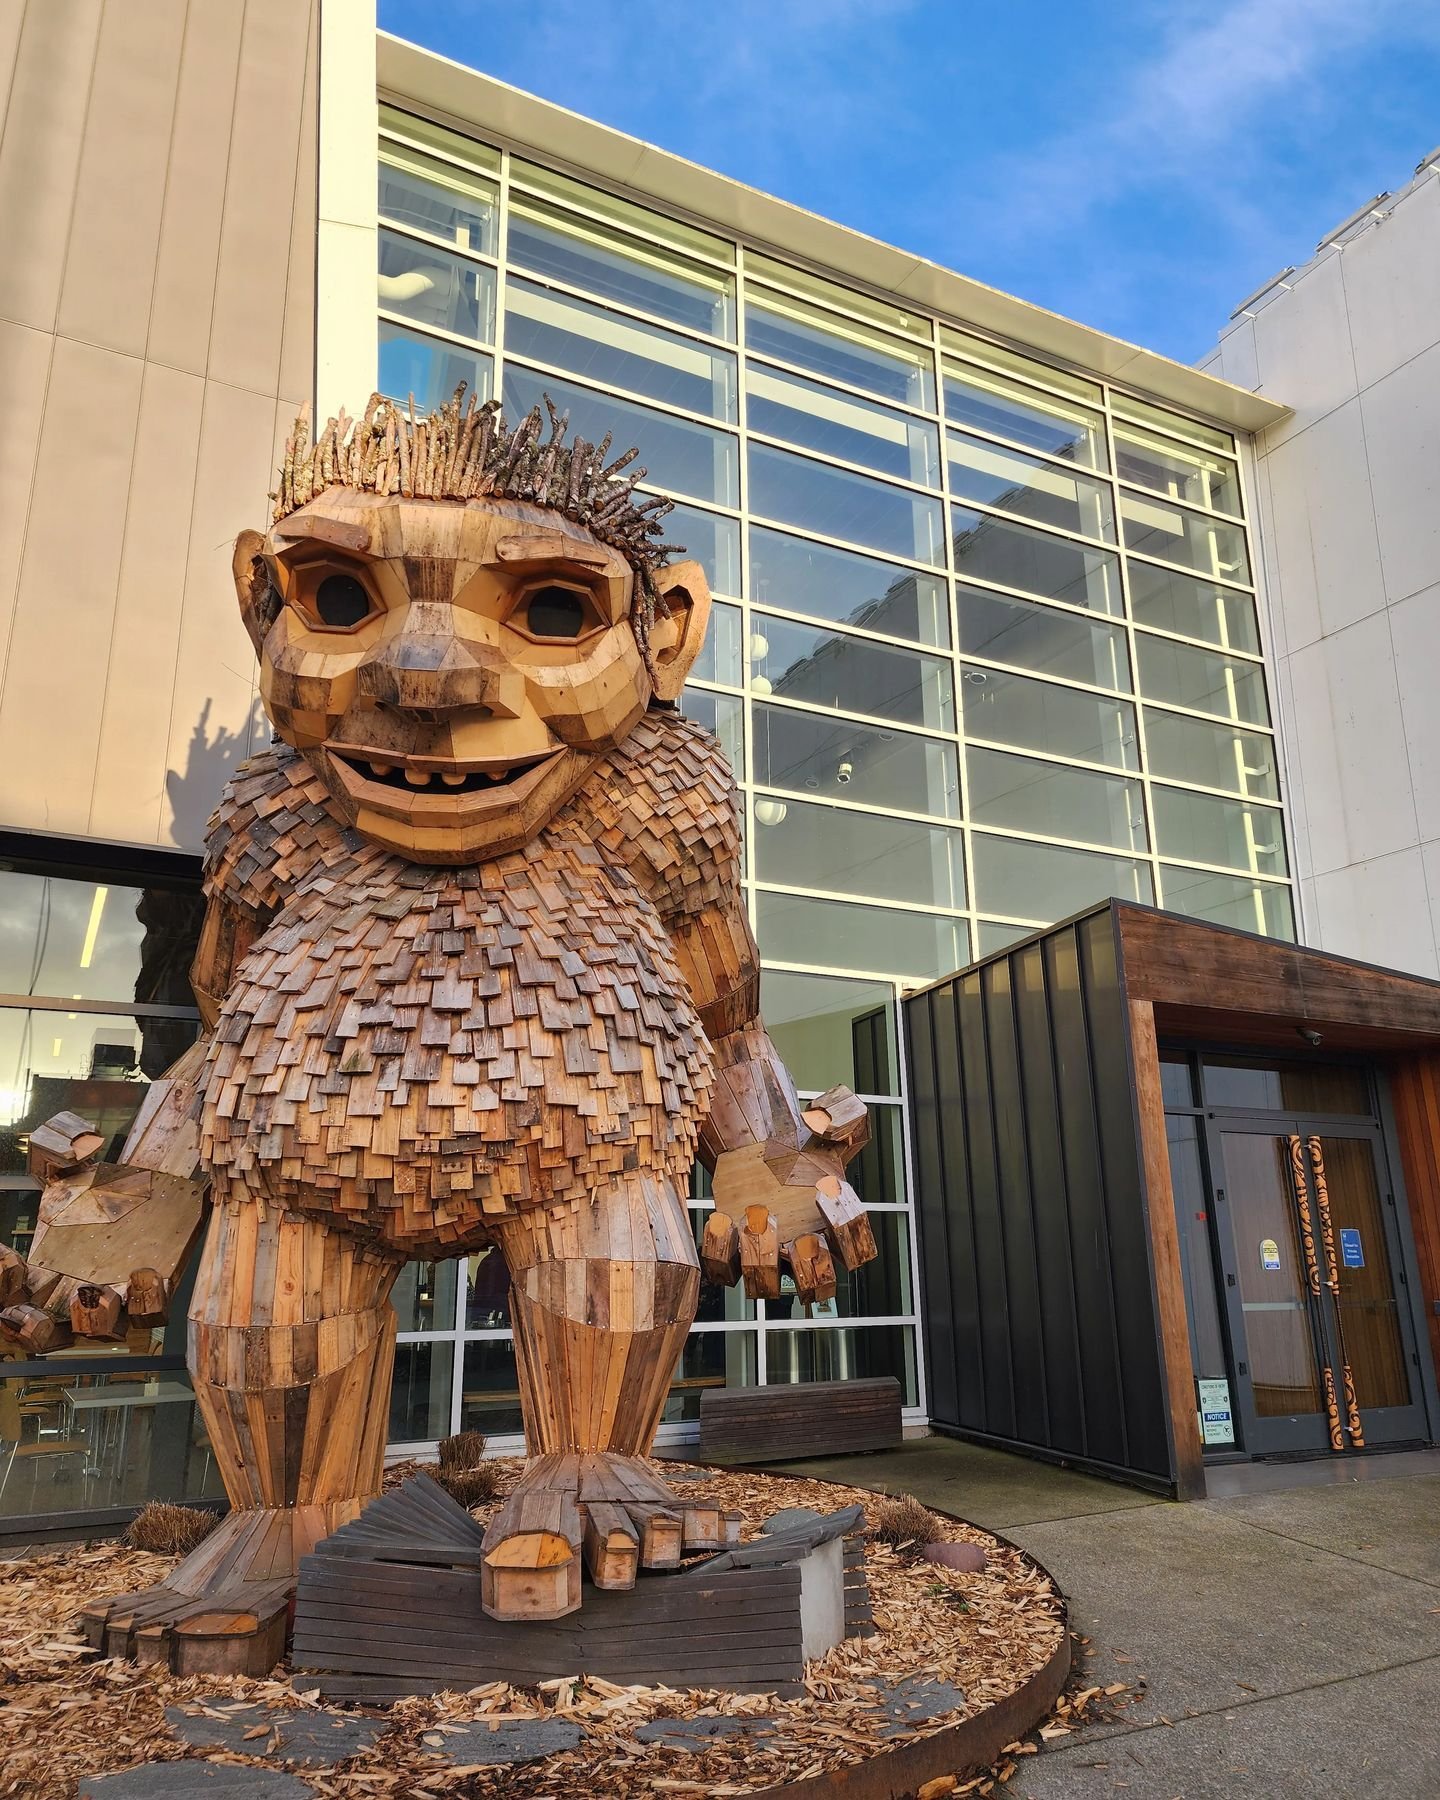 One of six of Thomas Dambo's Northwest Trolls welcomes you as you enter Seattle's National Nordic Museum in Ballard. 
 
For those of you who are unfamiliar with Thomas Dambo - he's a Danish environmental artist who has created over 120 troll installa